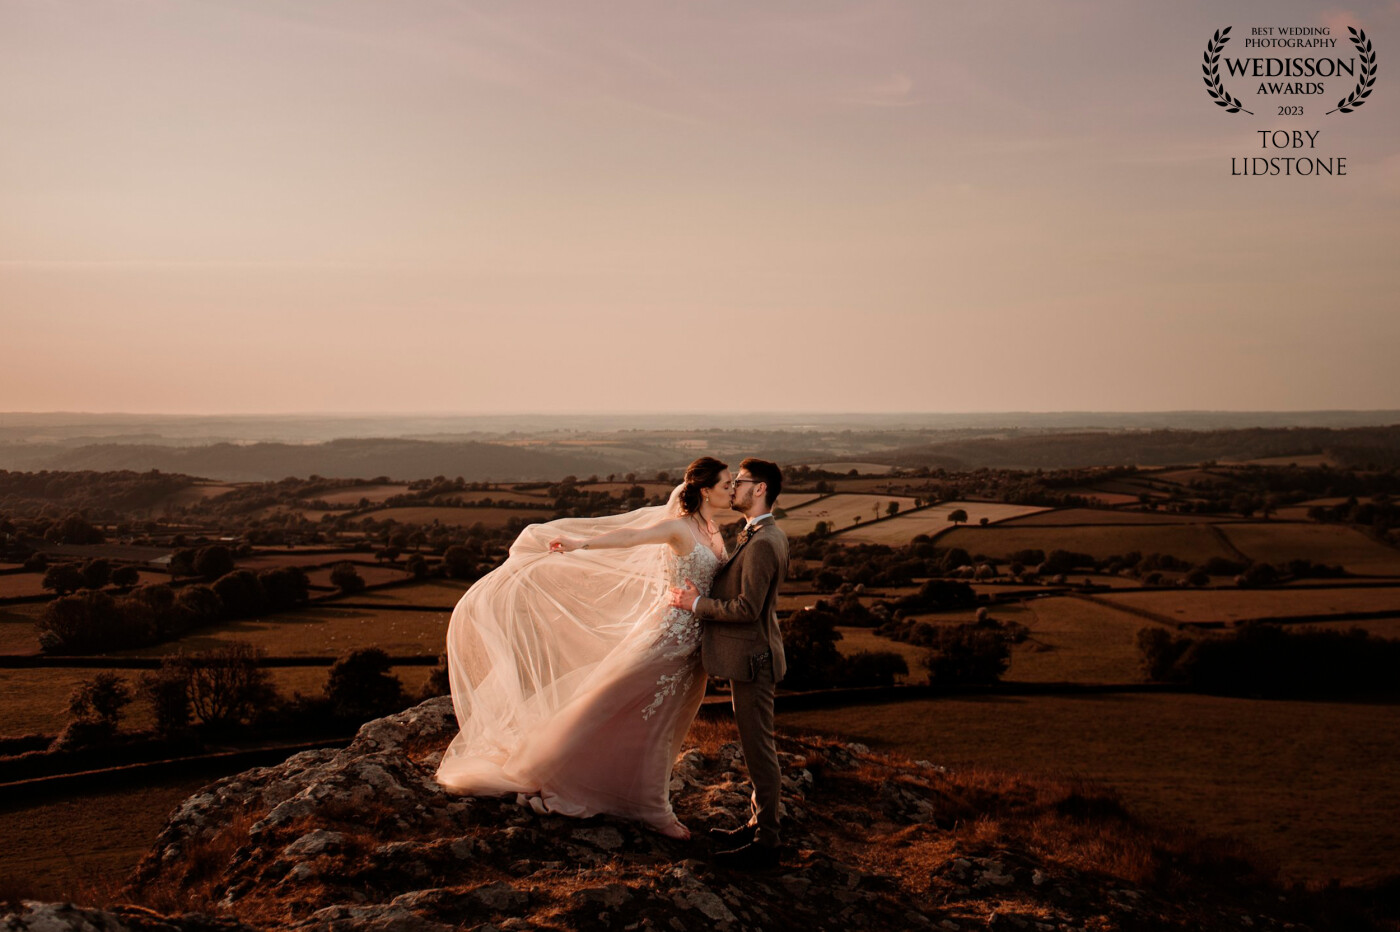 Christina & Aaron were more than happy to climb to the top of Brentor Church on Dartmoor, UK. <br />
The backdrop made an epic scene for this couples portrait.